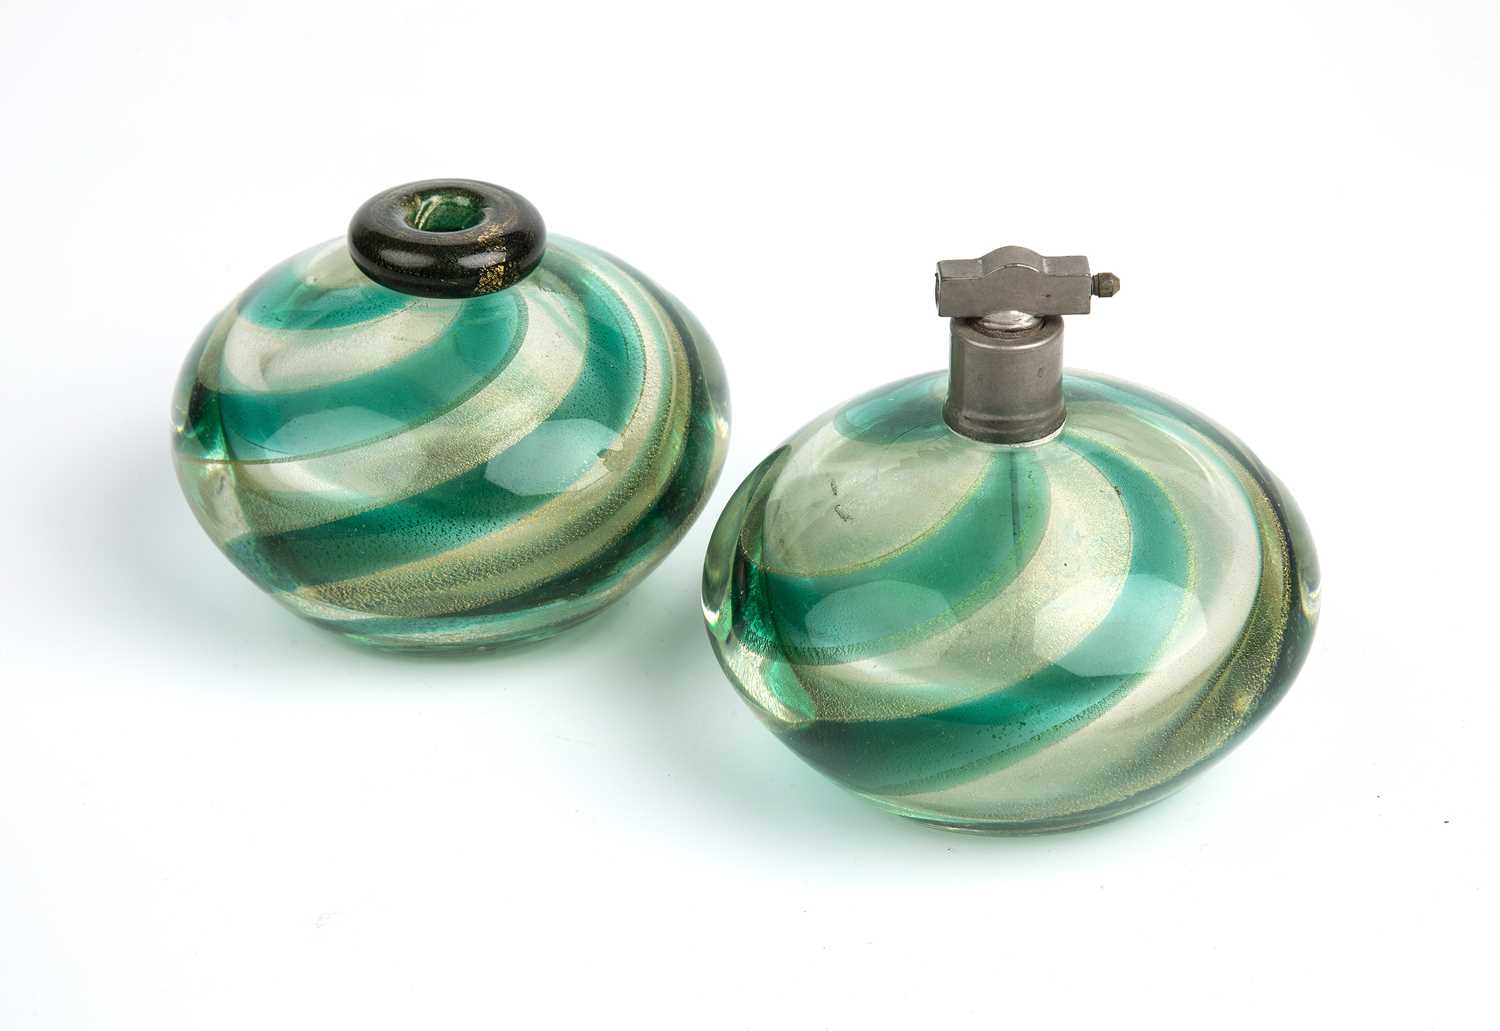 Art Deco Two vases, probably French glass, with a swirled pattern in green and gold 10cm high. - Image 2 of 3